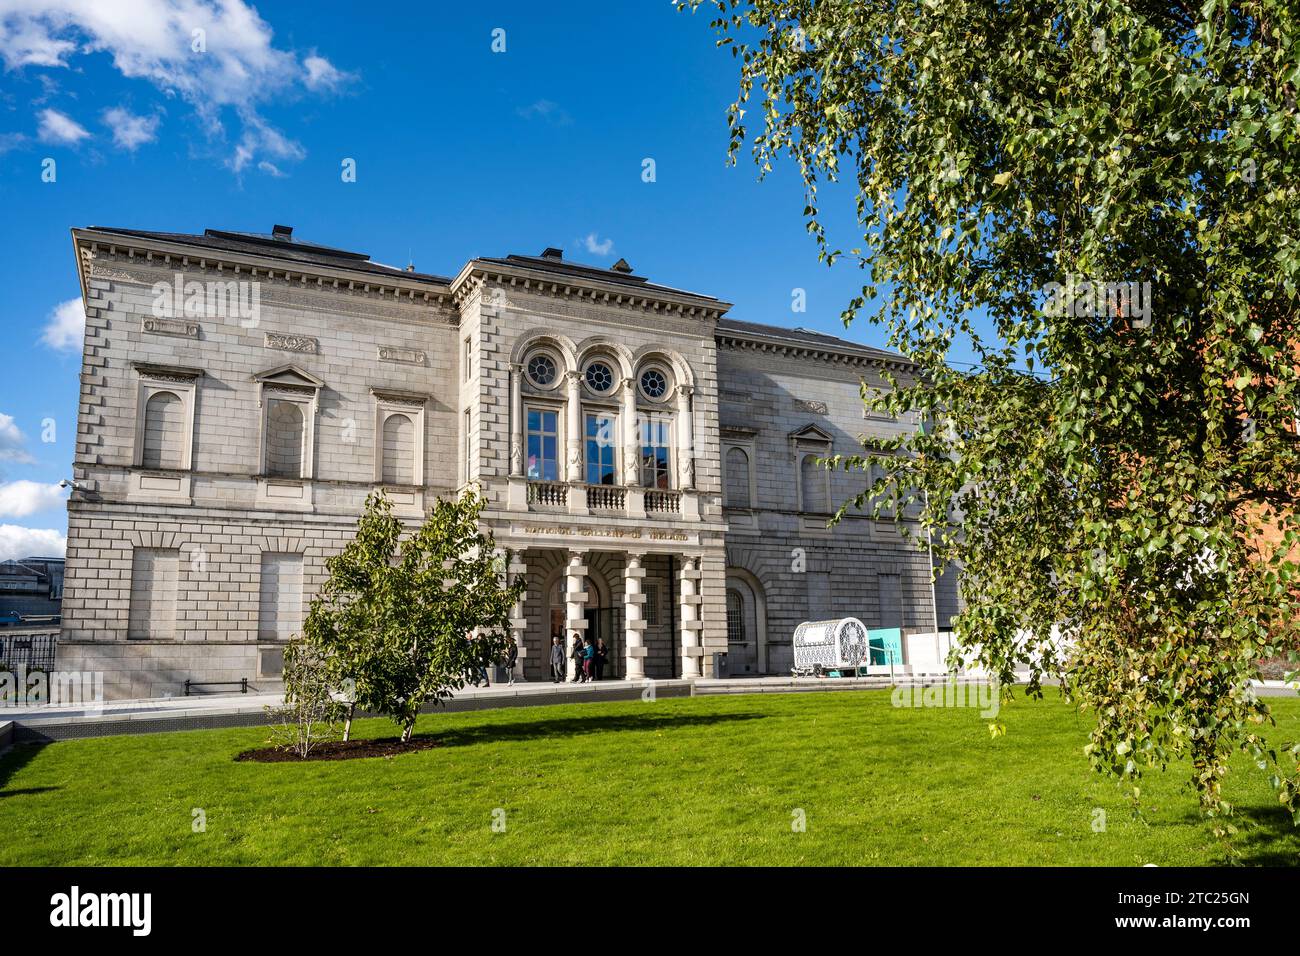 Façade of the National Gallery of Ireland, art gallery with European and Irish art from Medieval to Contemporary era, in Dublin city center, Ireland Stock Photo